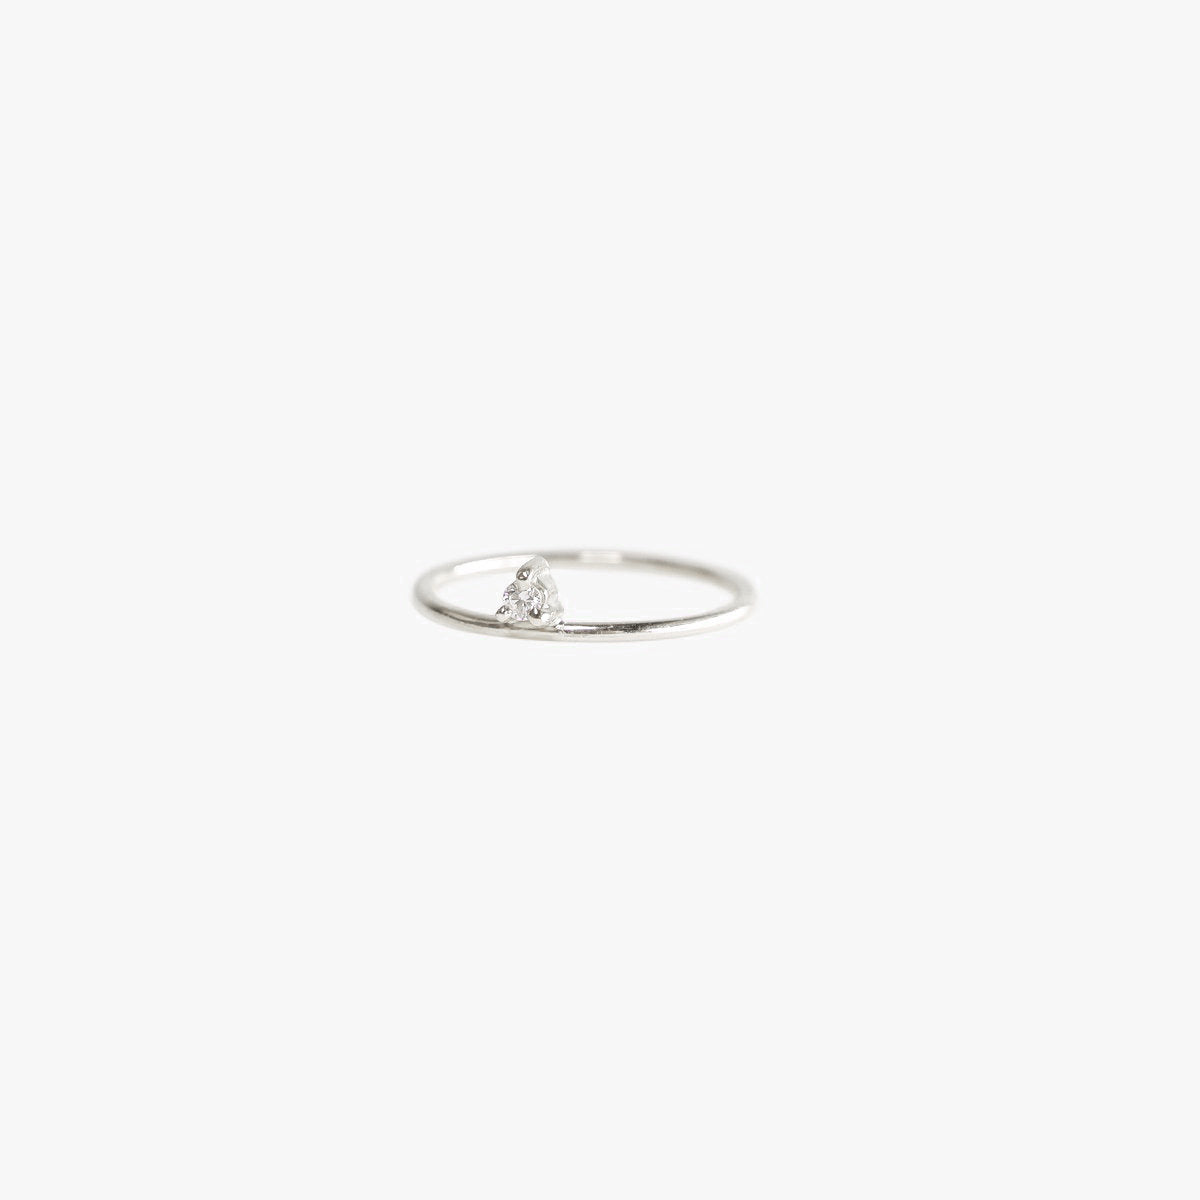 The Floating Diamond Ring in Solid Gold